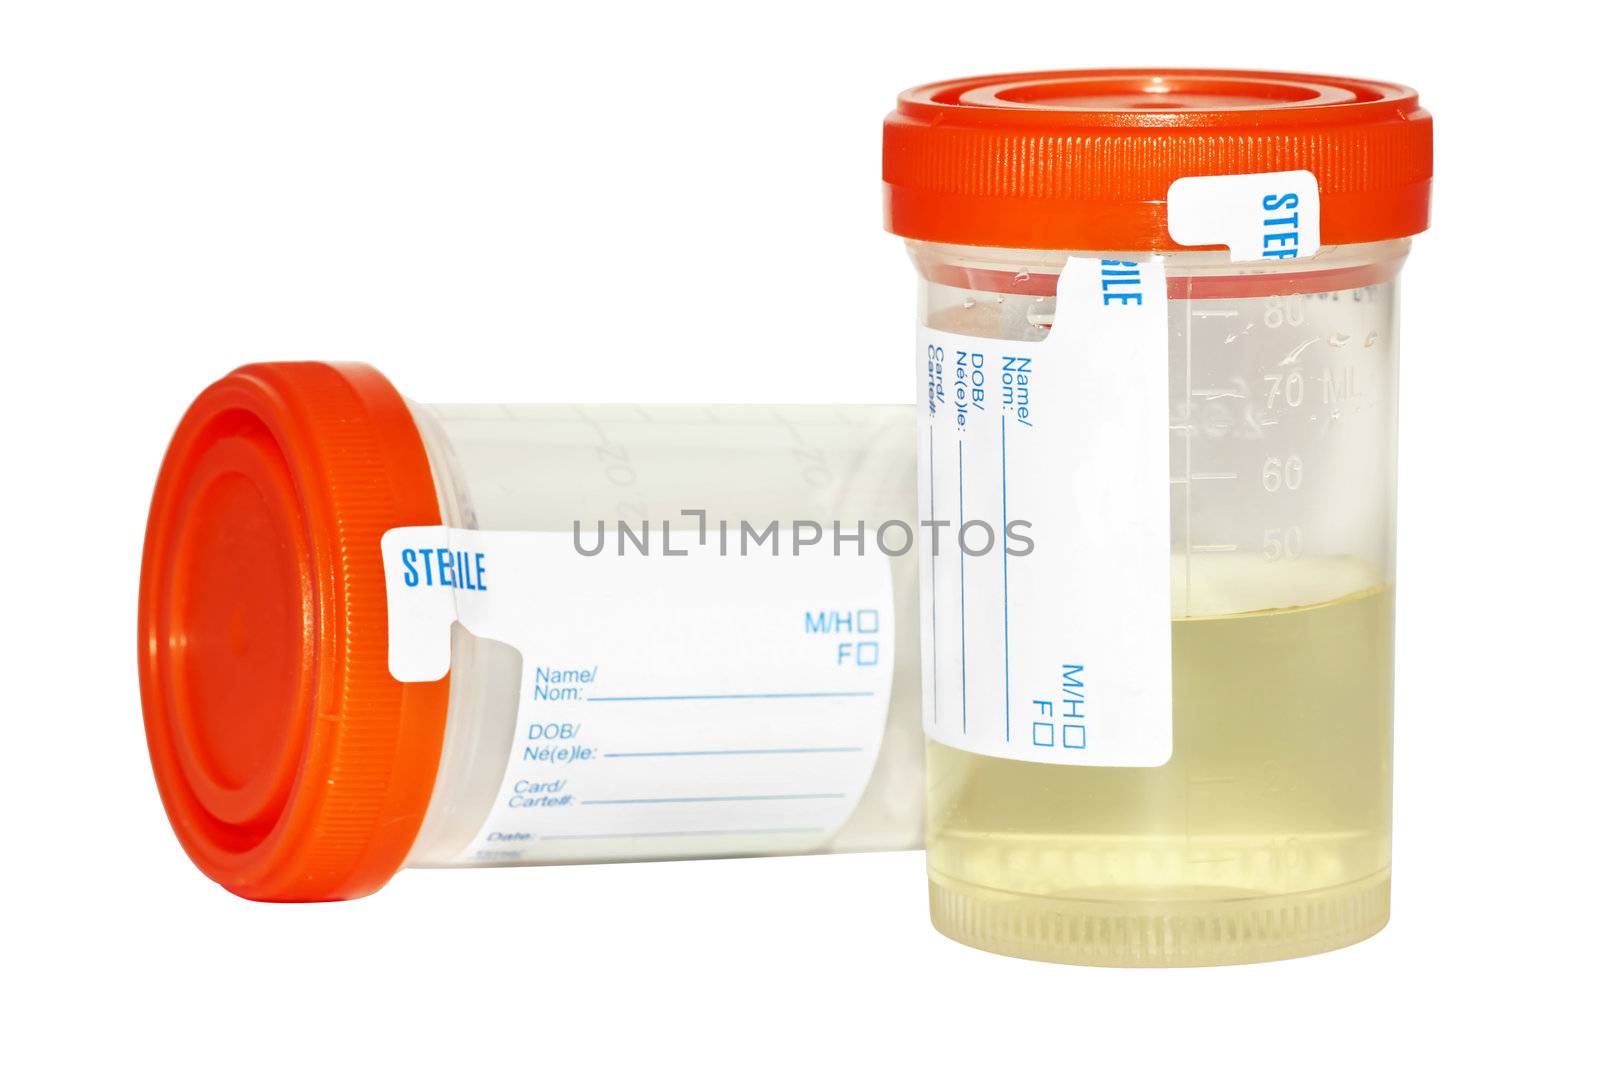 Urine sample collection bottles, one empty and sterile and the other filled with pee to be analyzed isolated on white background.